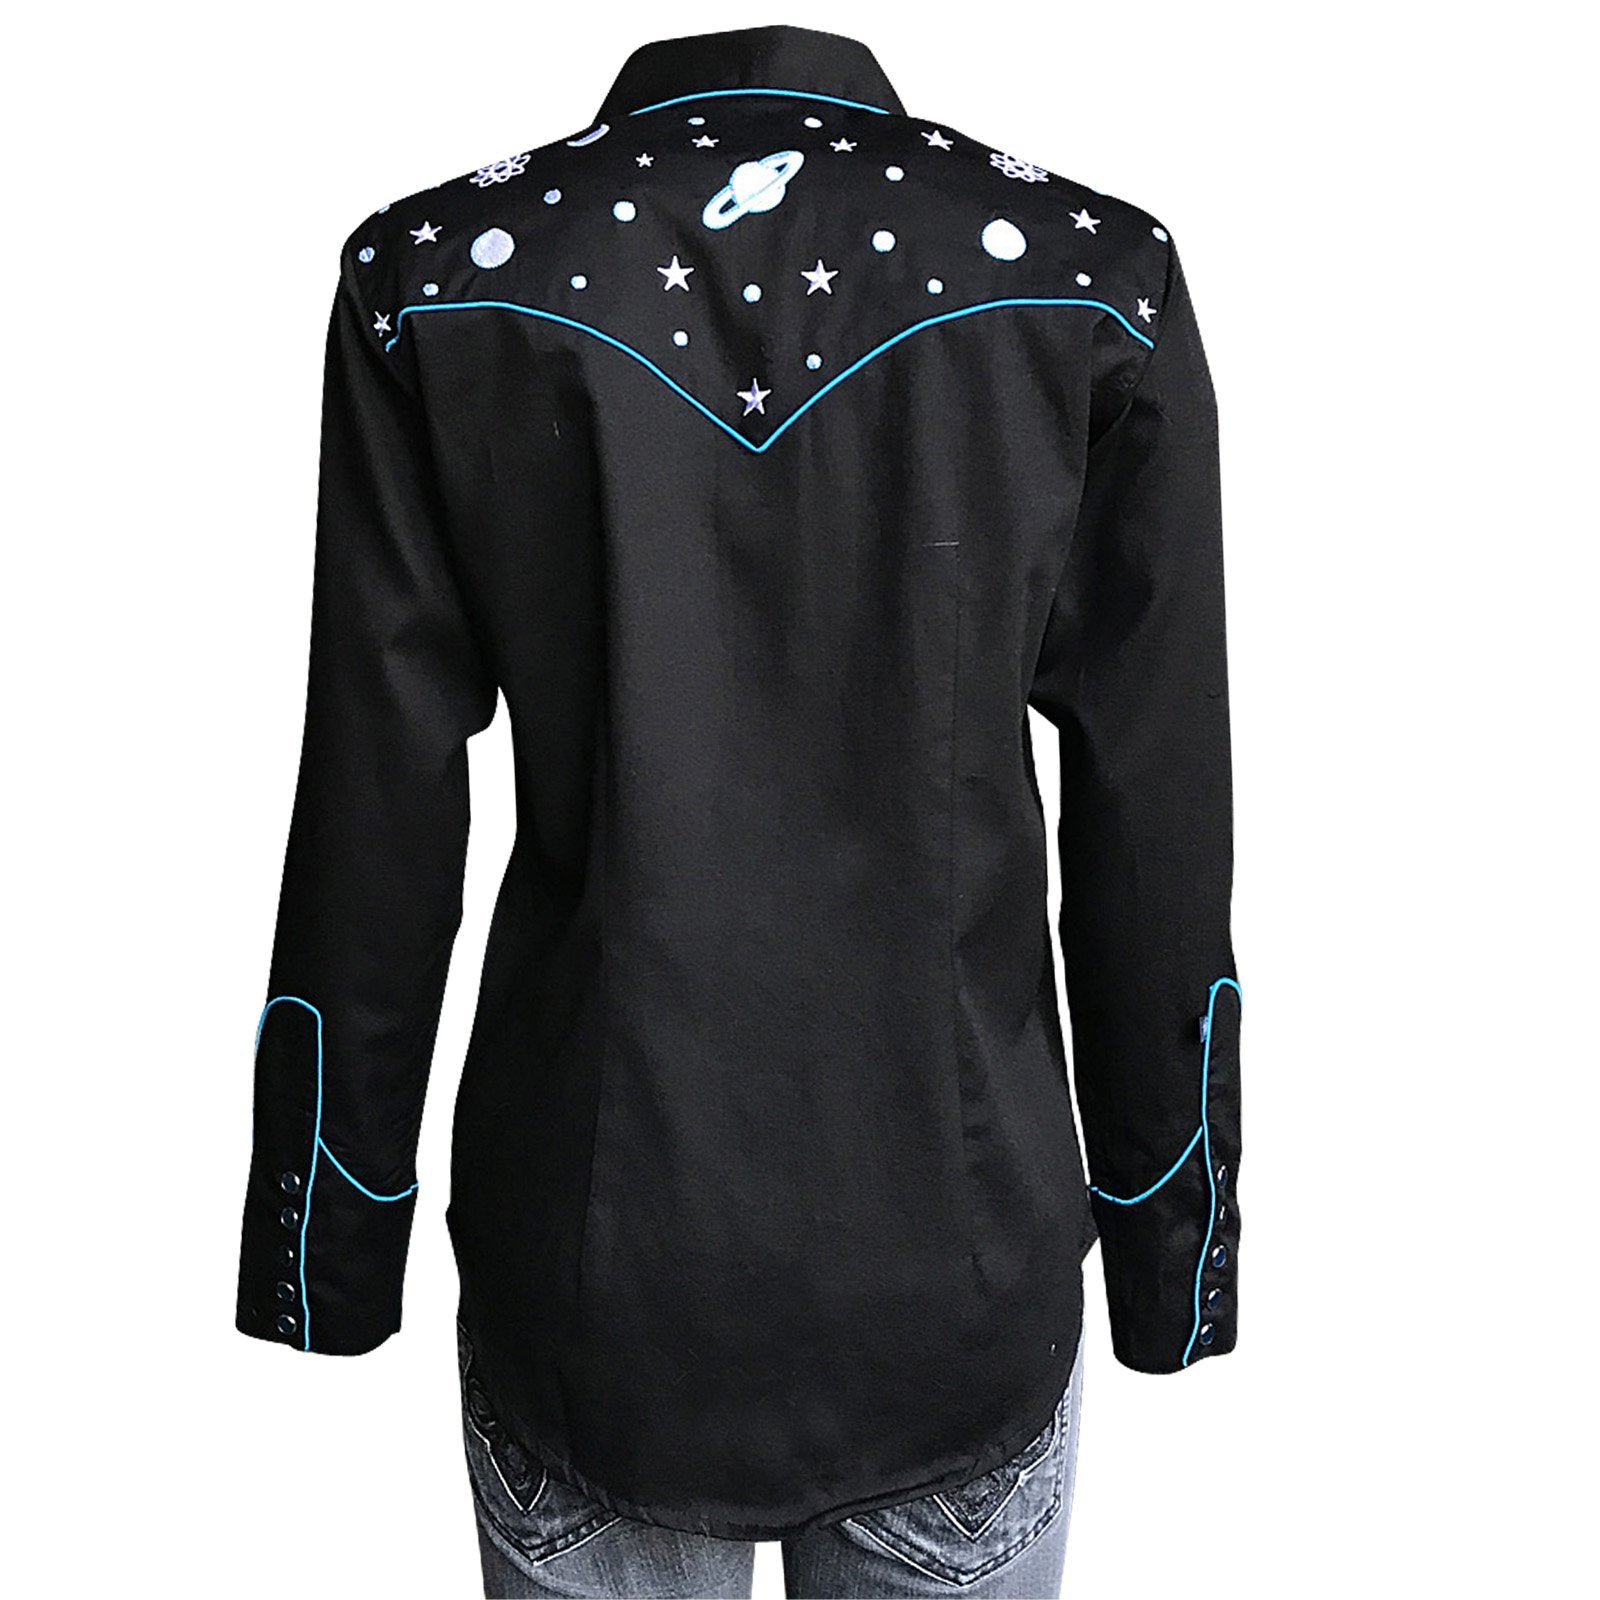 Rockmount Ranch Wear Ladies' Vintage Inspired Western Shirt with Embroidered Planets Front